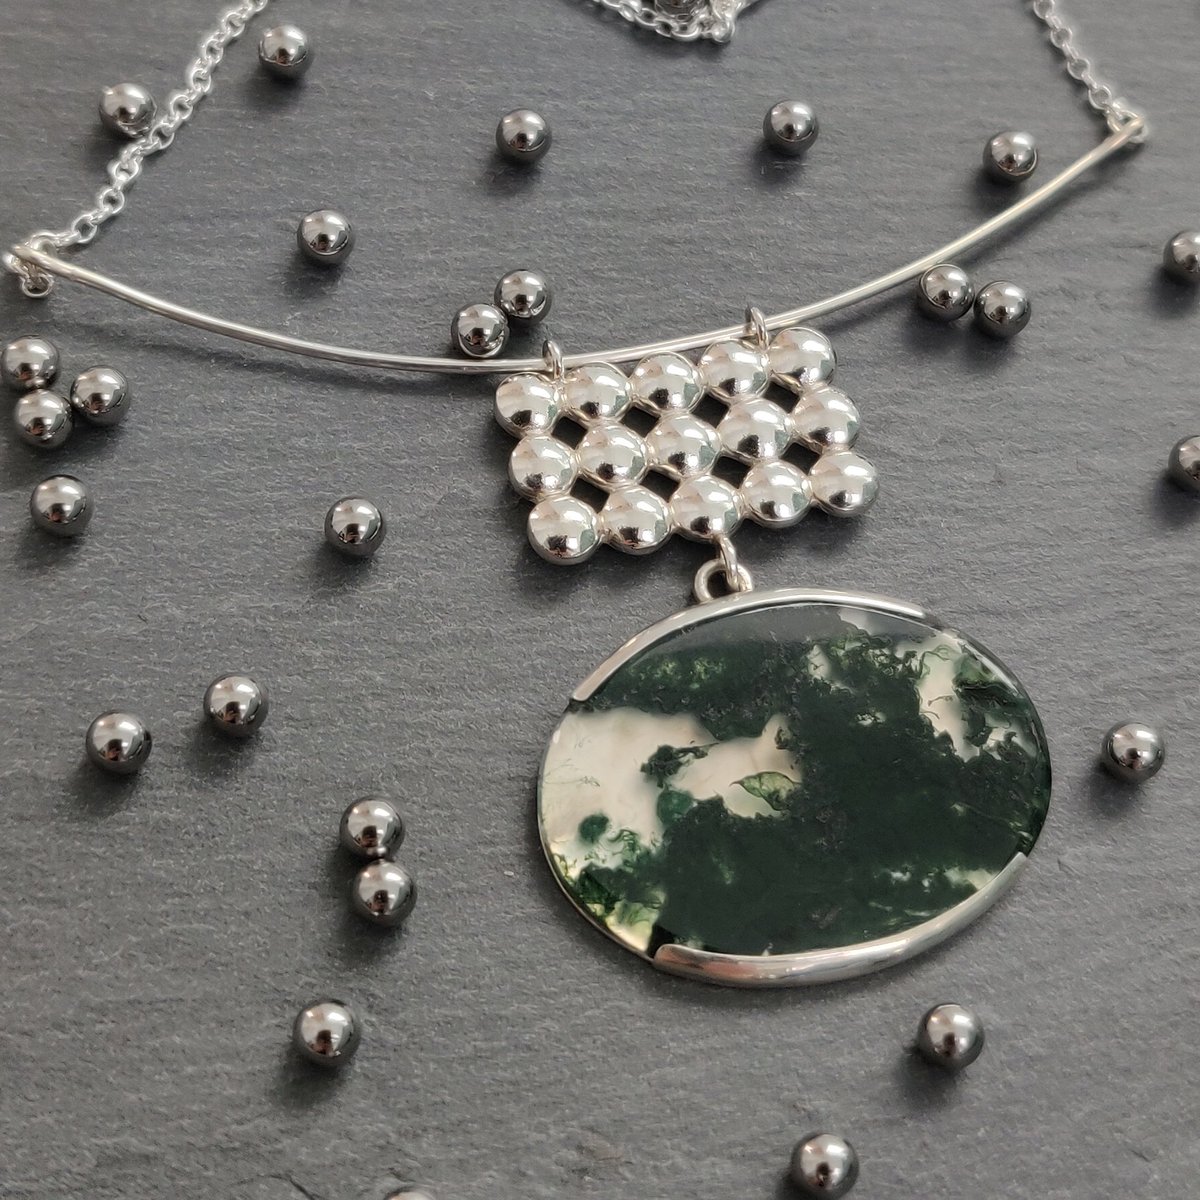 Large moss agate and silver, statement necklace 💎. Perfect for your festive outfit 😀. Have a look at etsy.com/uk/shop/TadMod… 😀.
#statementnecklace #festivejewelry #agatenecklace #gift #giftforher #ChristmasDay #fashionblogger #ChristmasGift